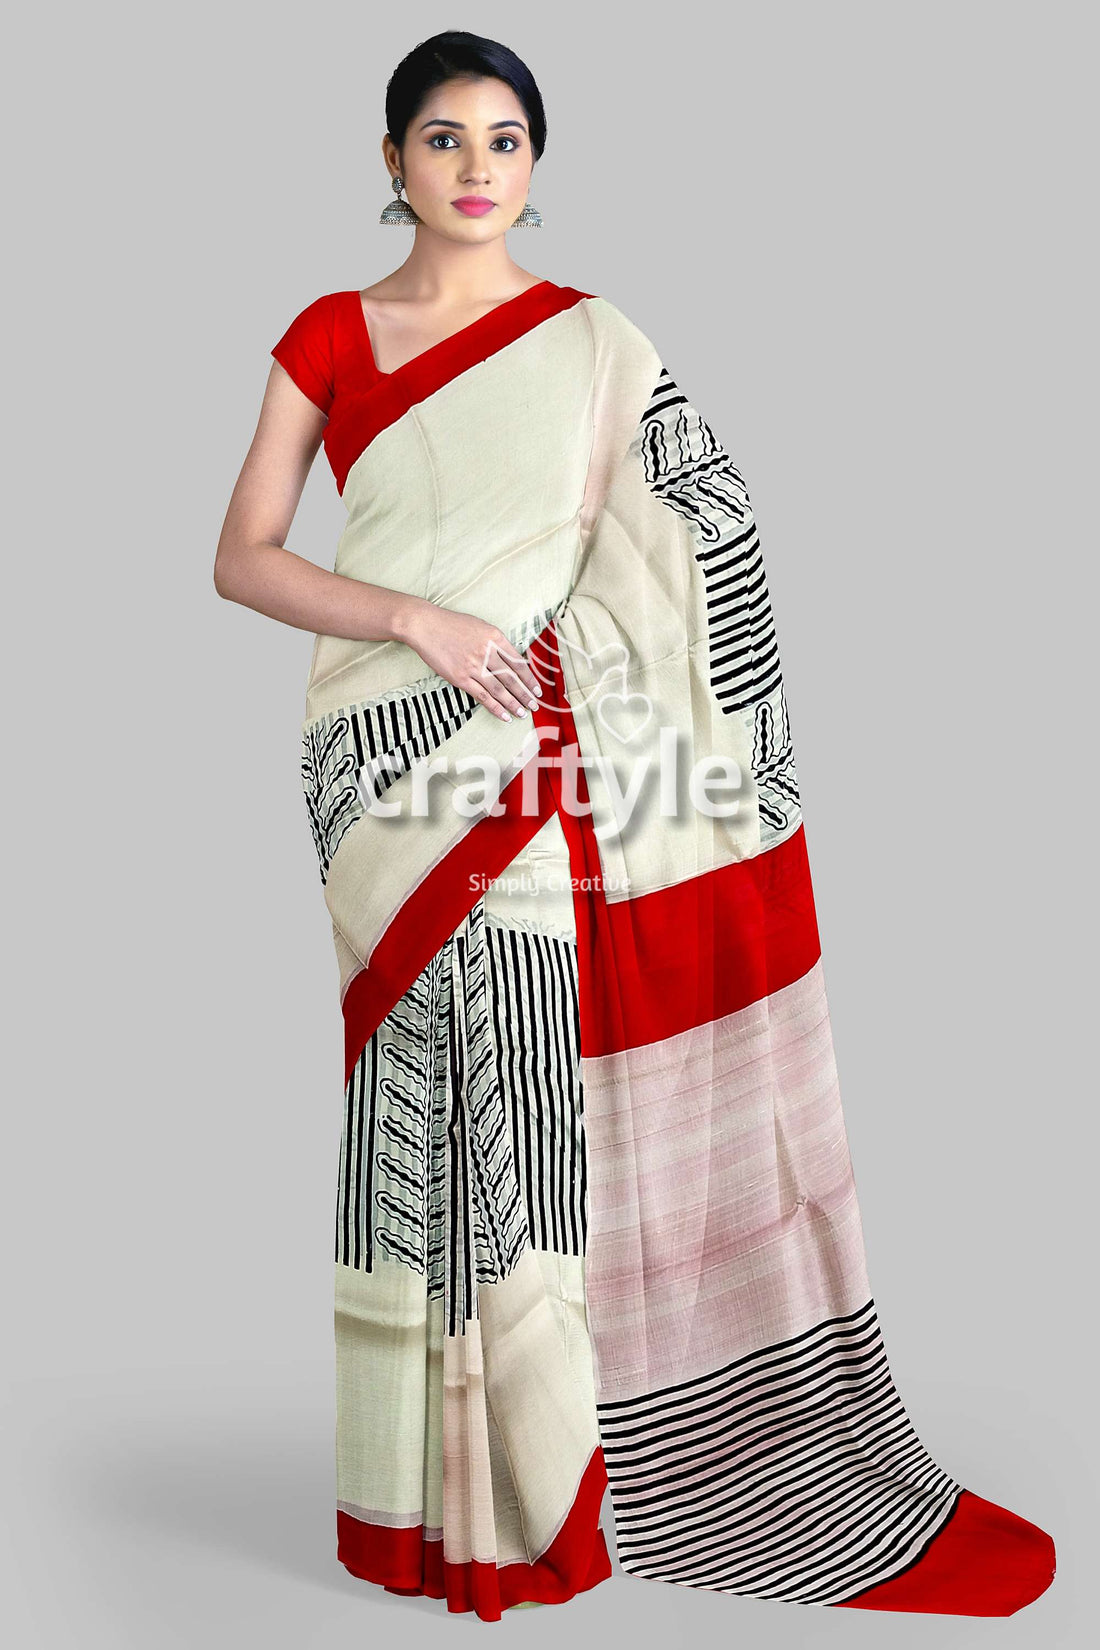 Crimson Red Hand Block Print Pure Mulberry Silk Saree with Traditional White Drape - Craftyle